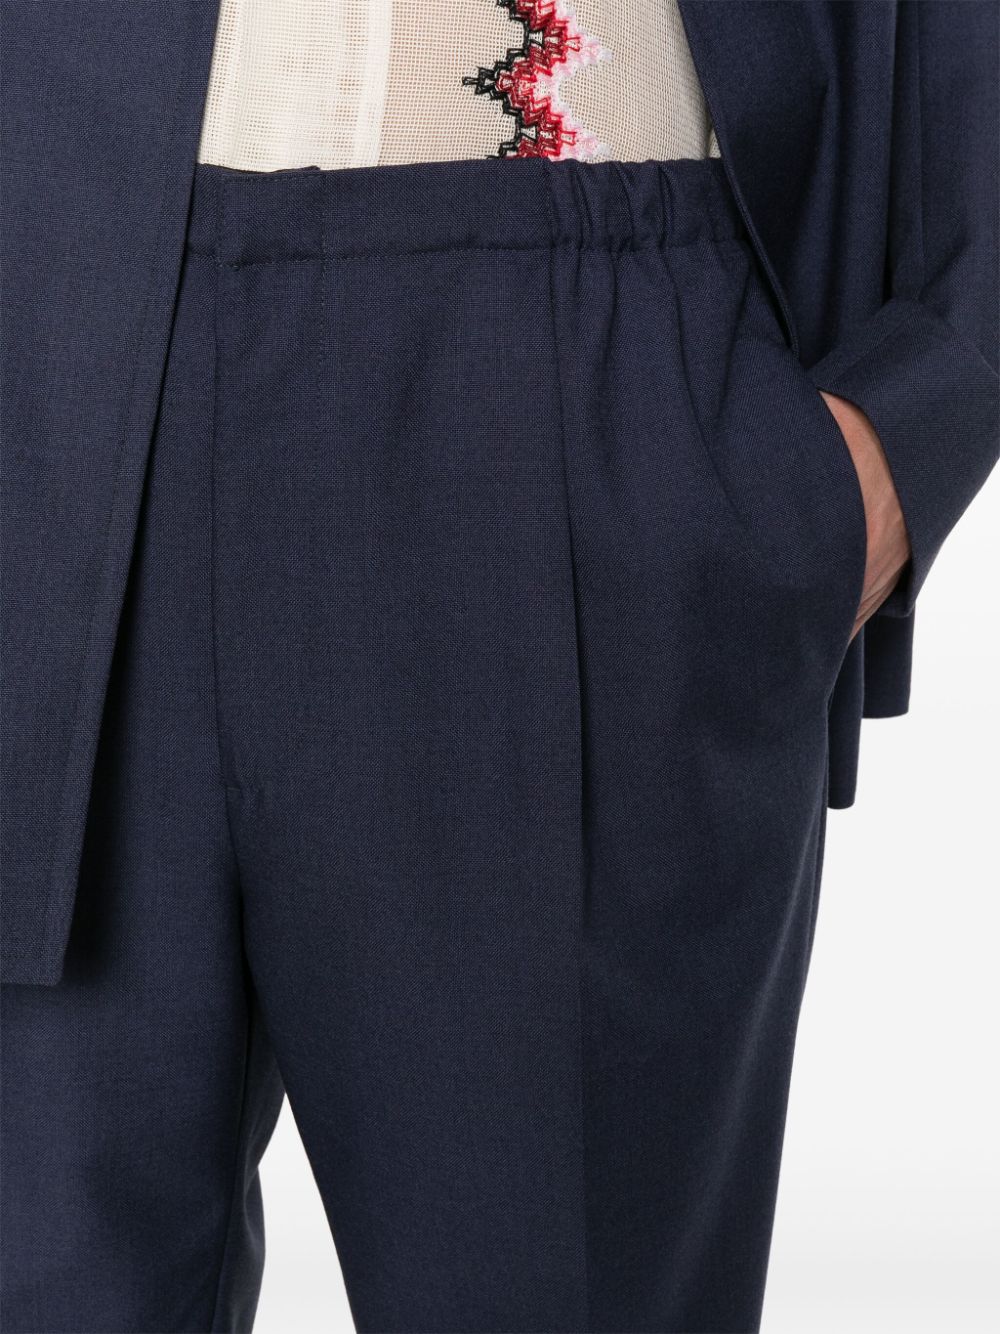 Pleat-detailing wool trousers<BR/><BR/><BR/>